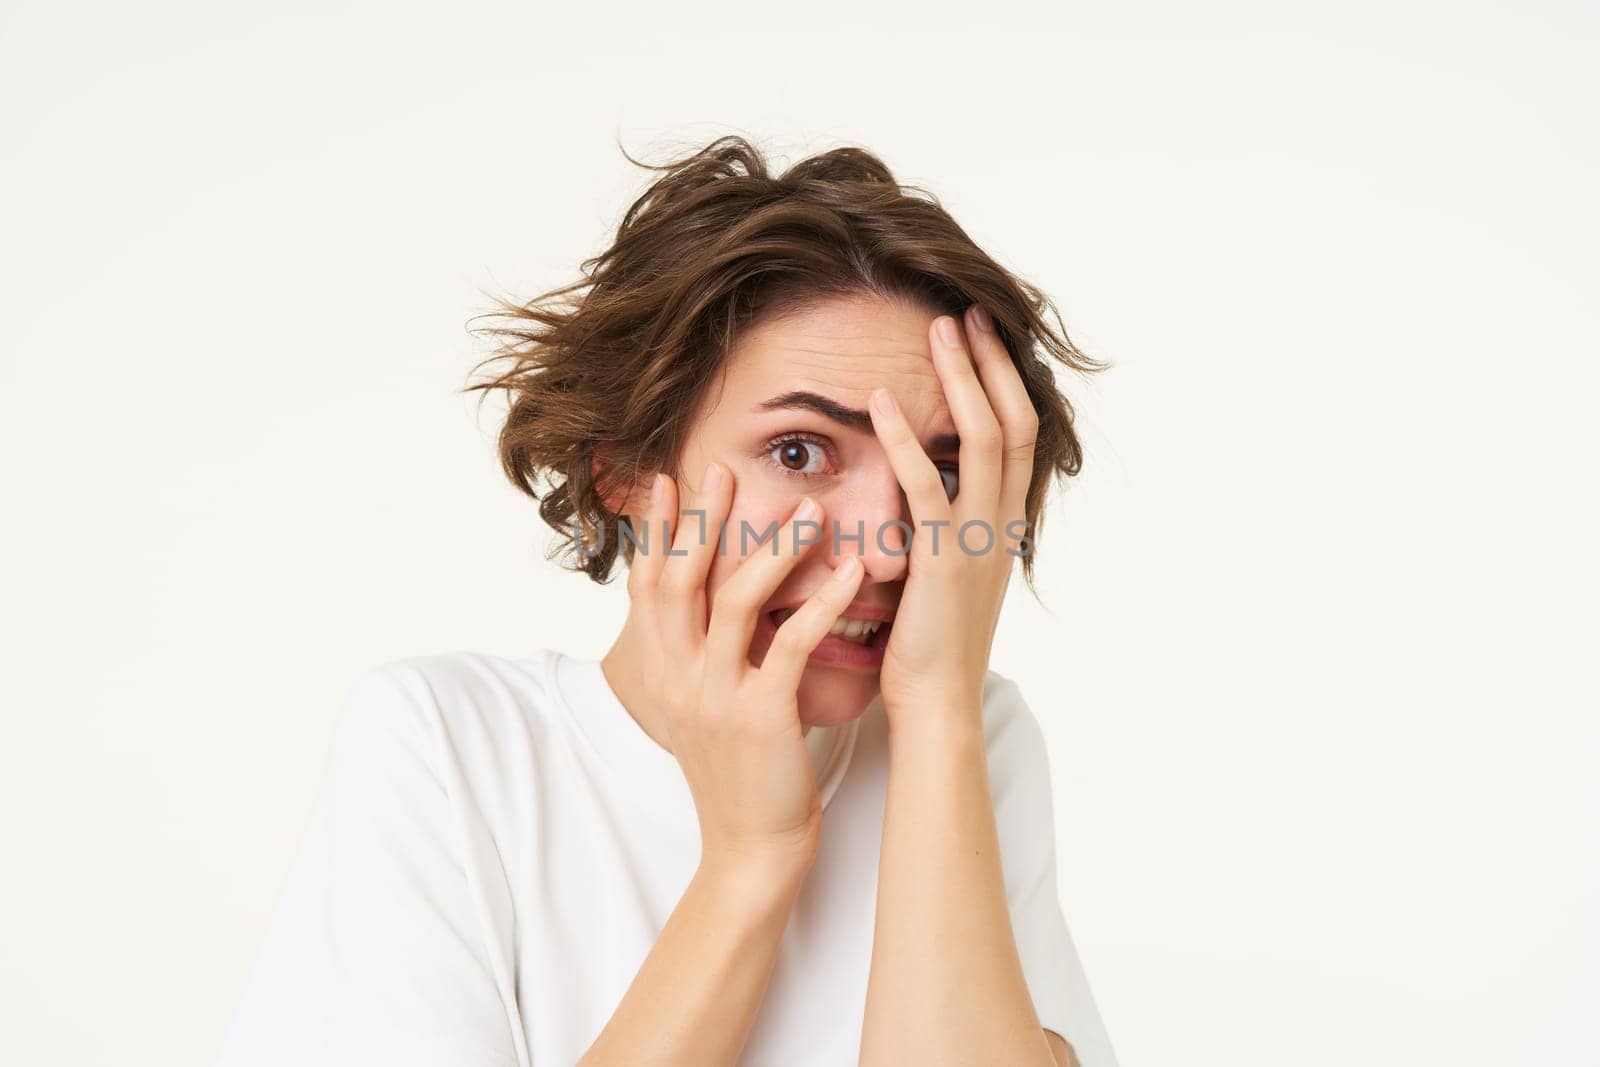 Close up of brunette woman hiding her face, screams and looks frightened, horrified by something, standing scared against white background. Copy space